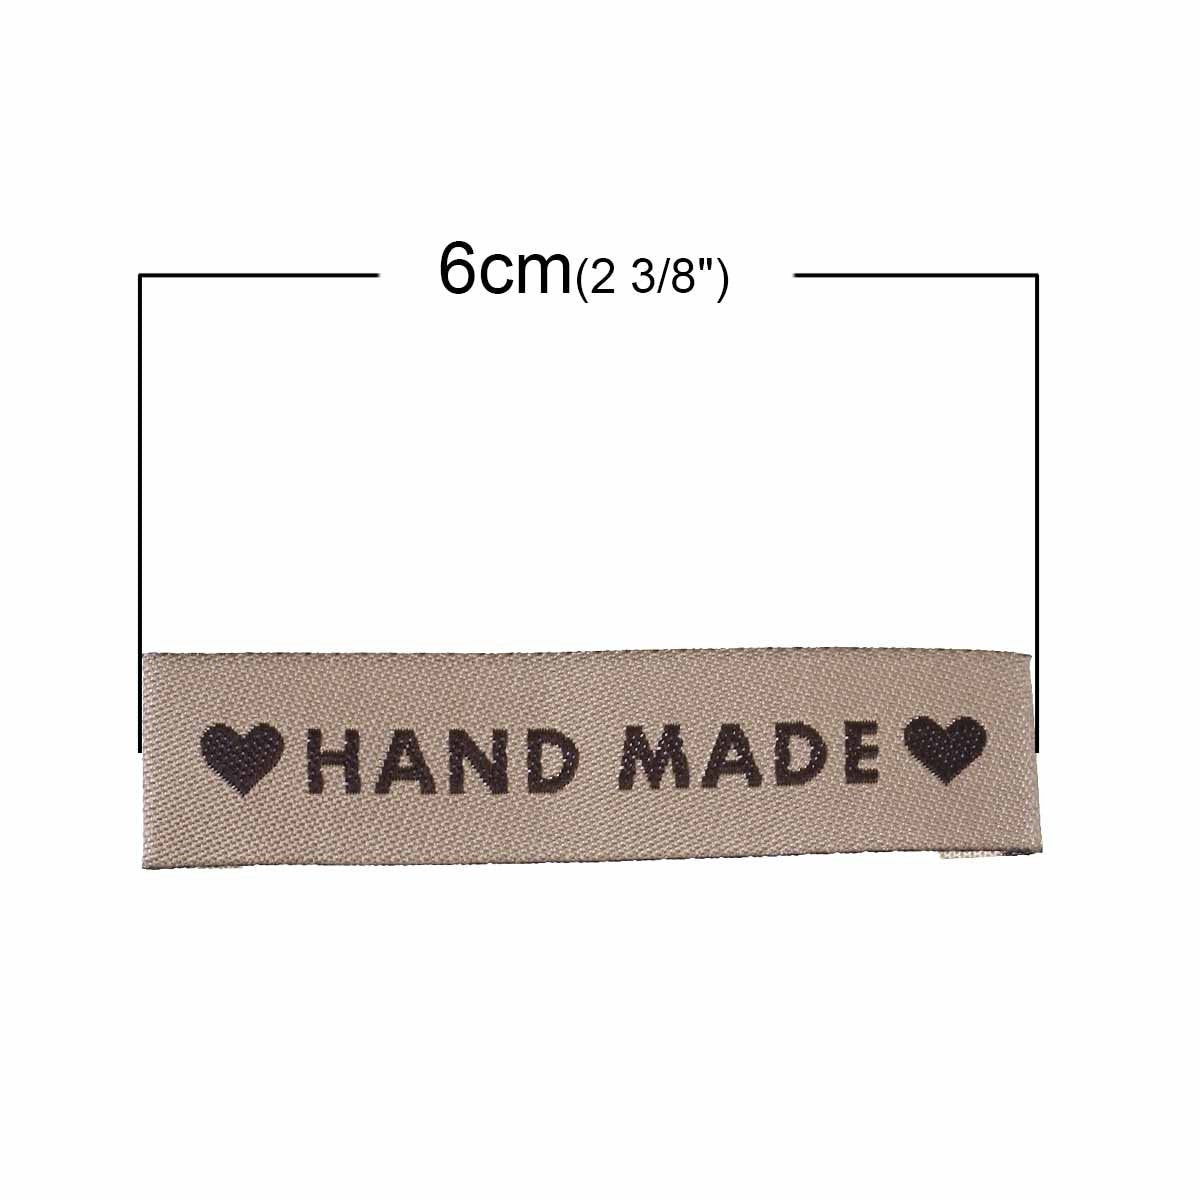 Sewing Labels Hand Made with Love